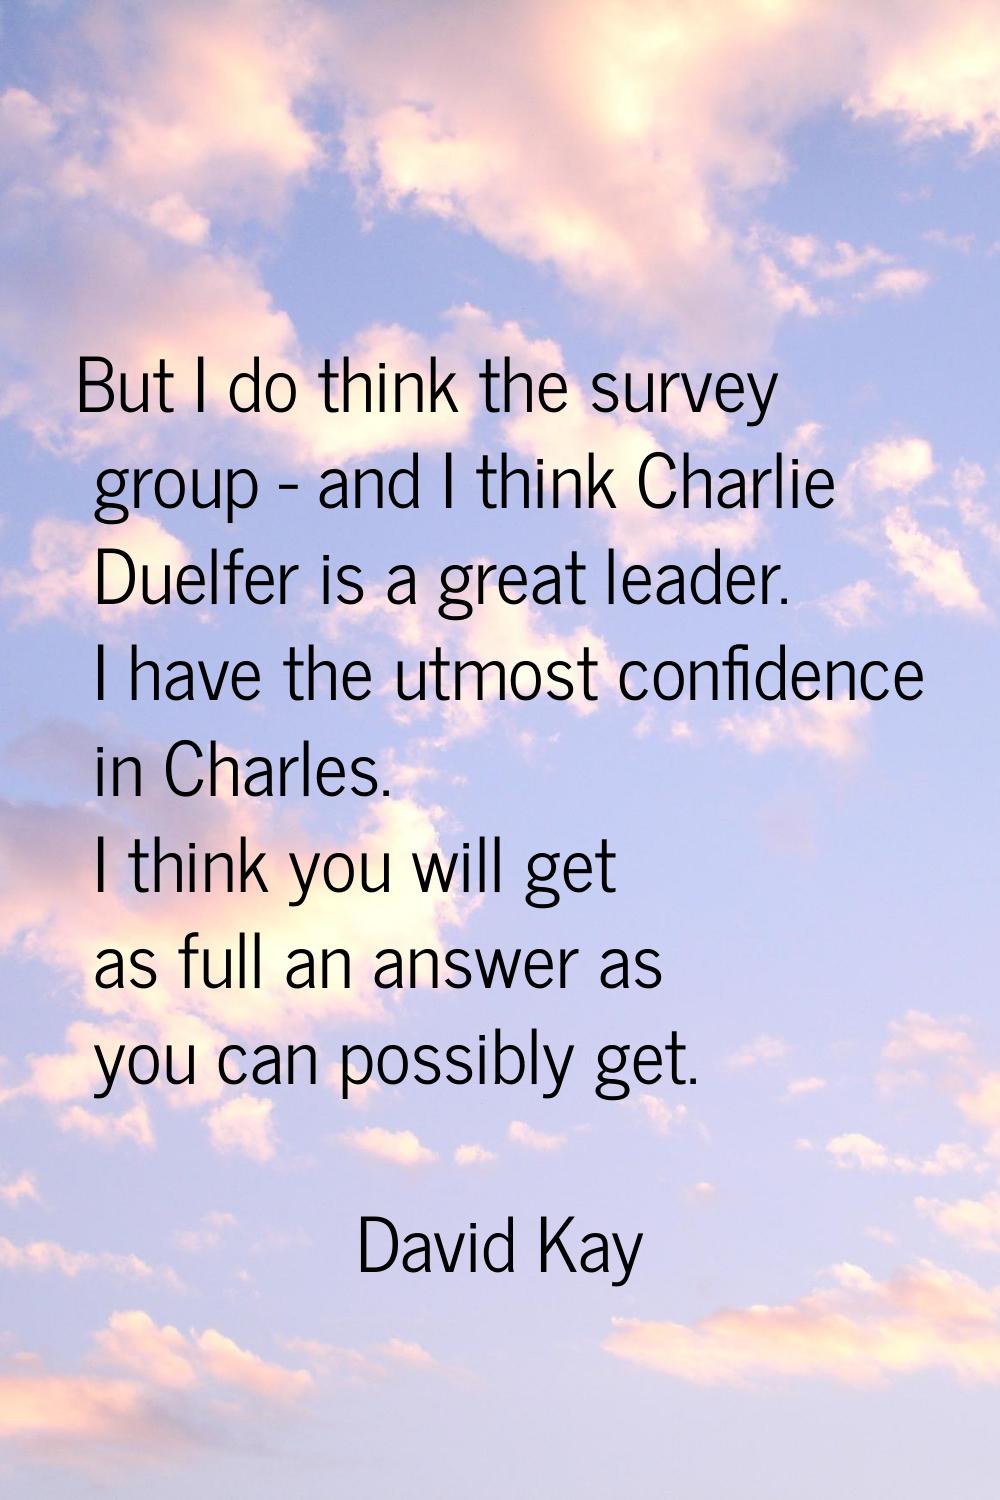 But I do think the survey group - and I think Charlie Duelfer is a great leader. I have the utmost 